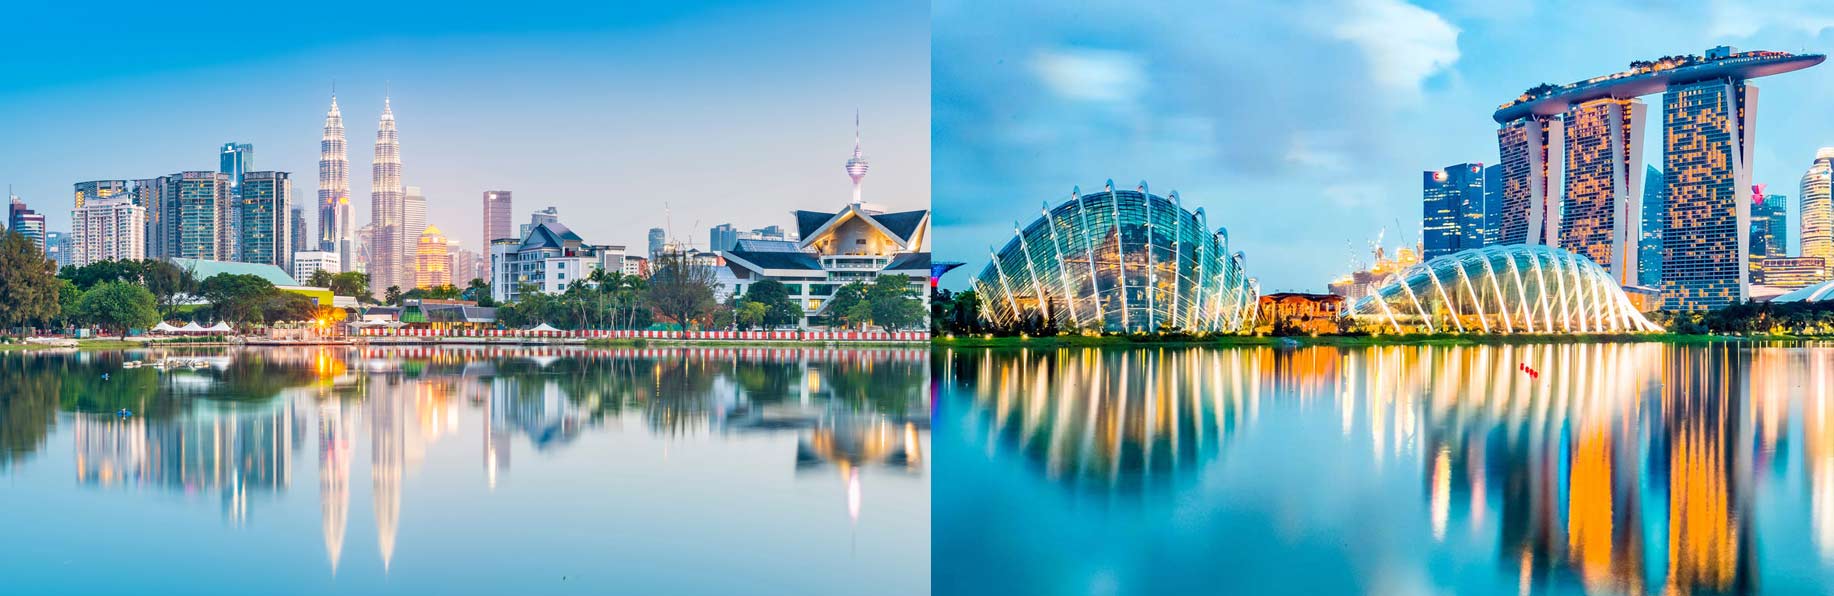 singapore indonesia tour package